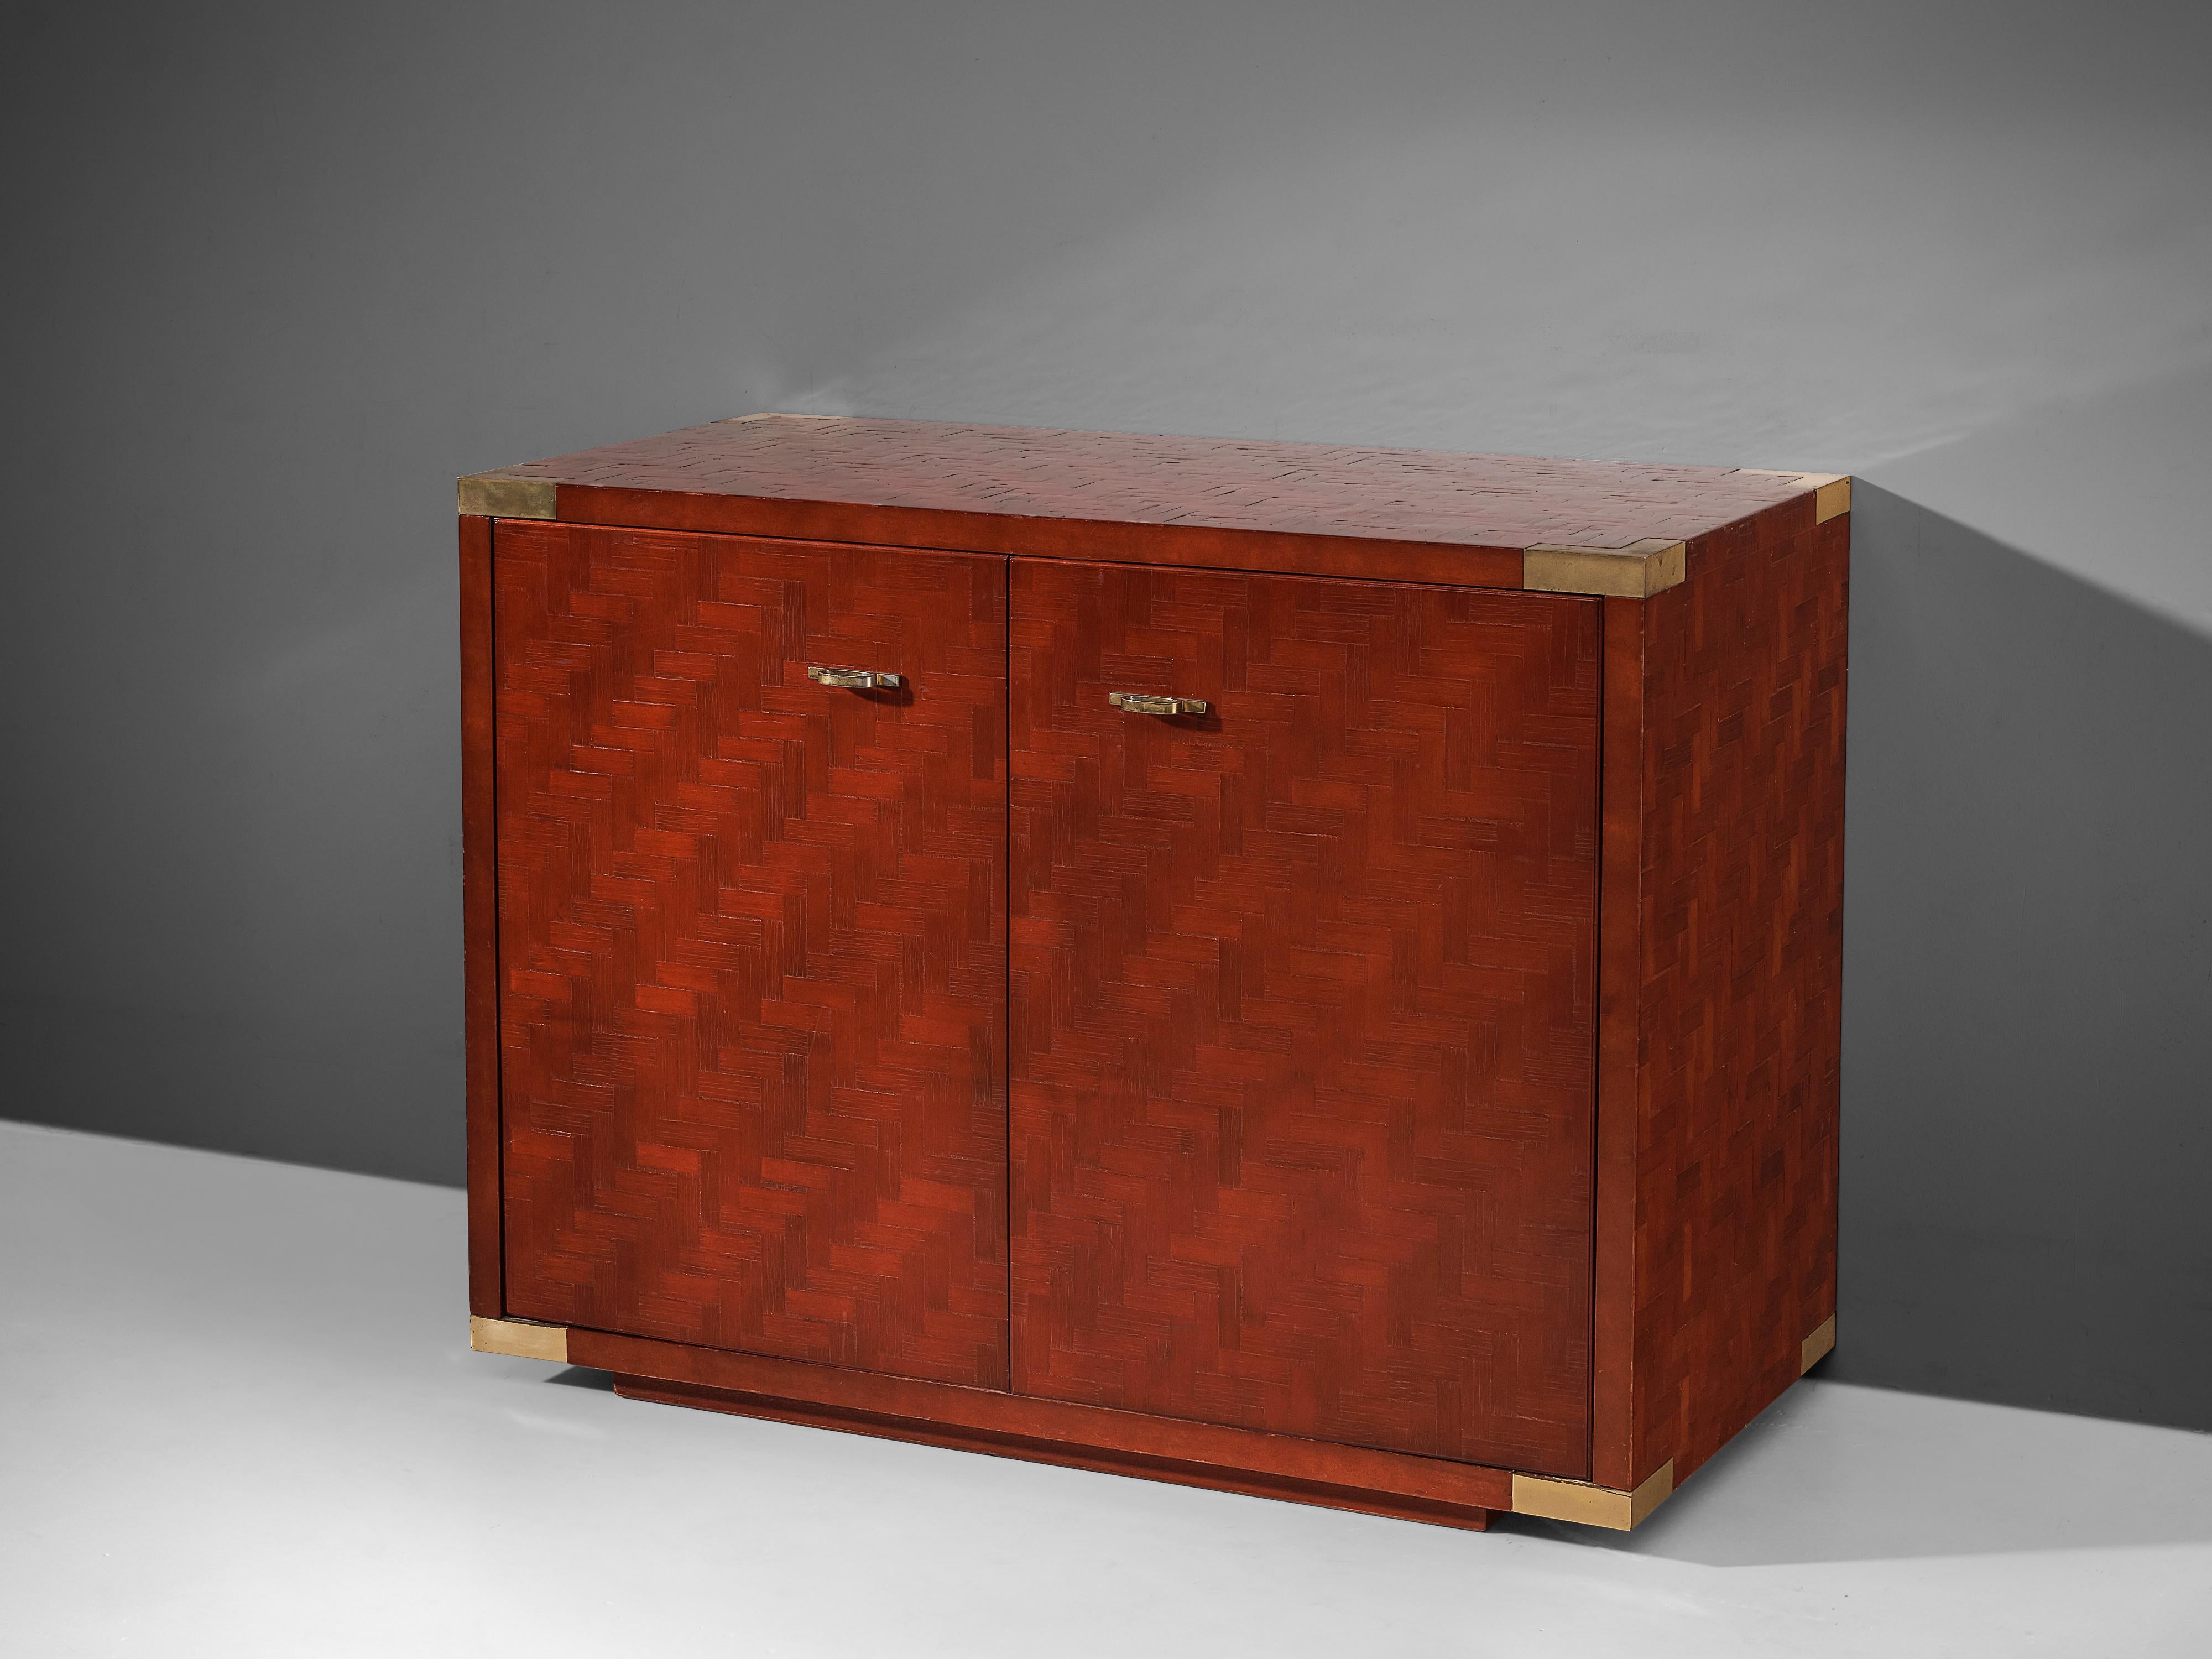 Cabinet, lacquered wood, brass, Europe, 1960s. 

This elegant cabinet is a good example of excellent woodworking by virtue of the red lacquered surface which consists of multiple rectangular wooden pieces, each placed according to a fixed pattern.